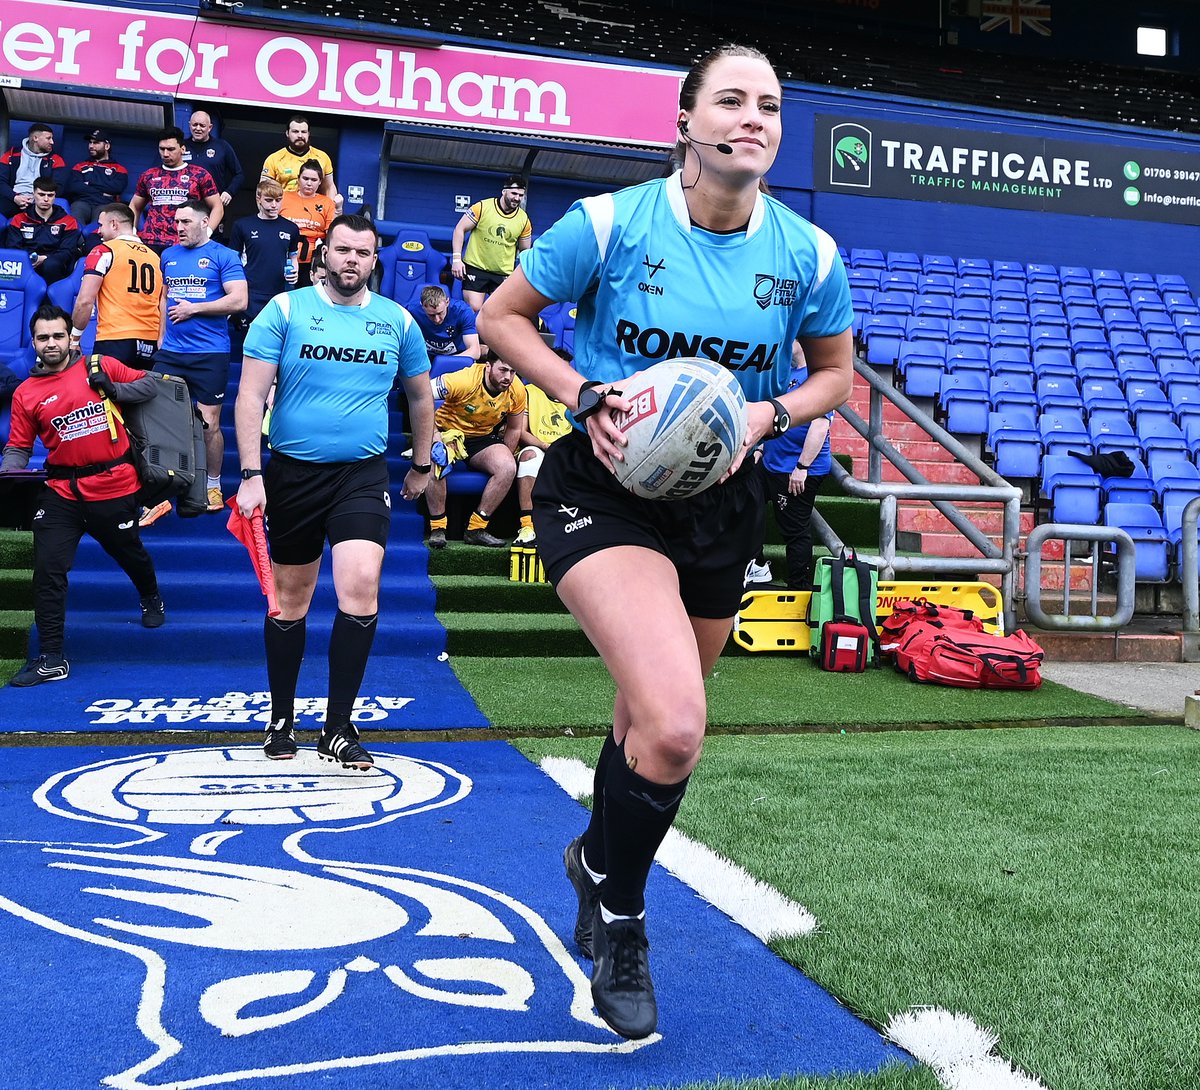 Congrats to Tara Jones #RugbyLeague history maker. First ever woman to referee a @TheRFL men's league fixture. The modestly confident smile. Marvellous !! all on SWpix.com